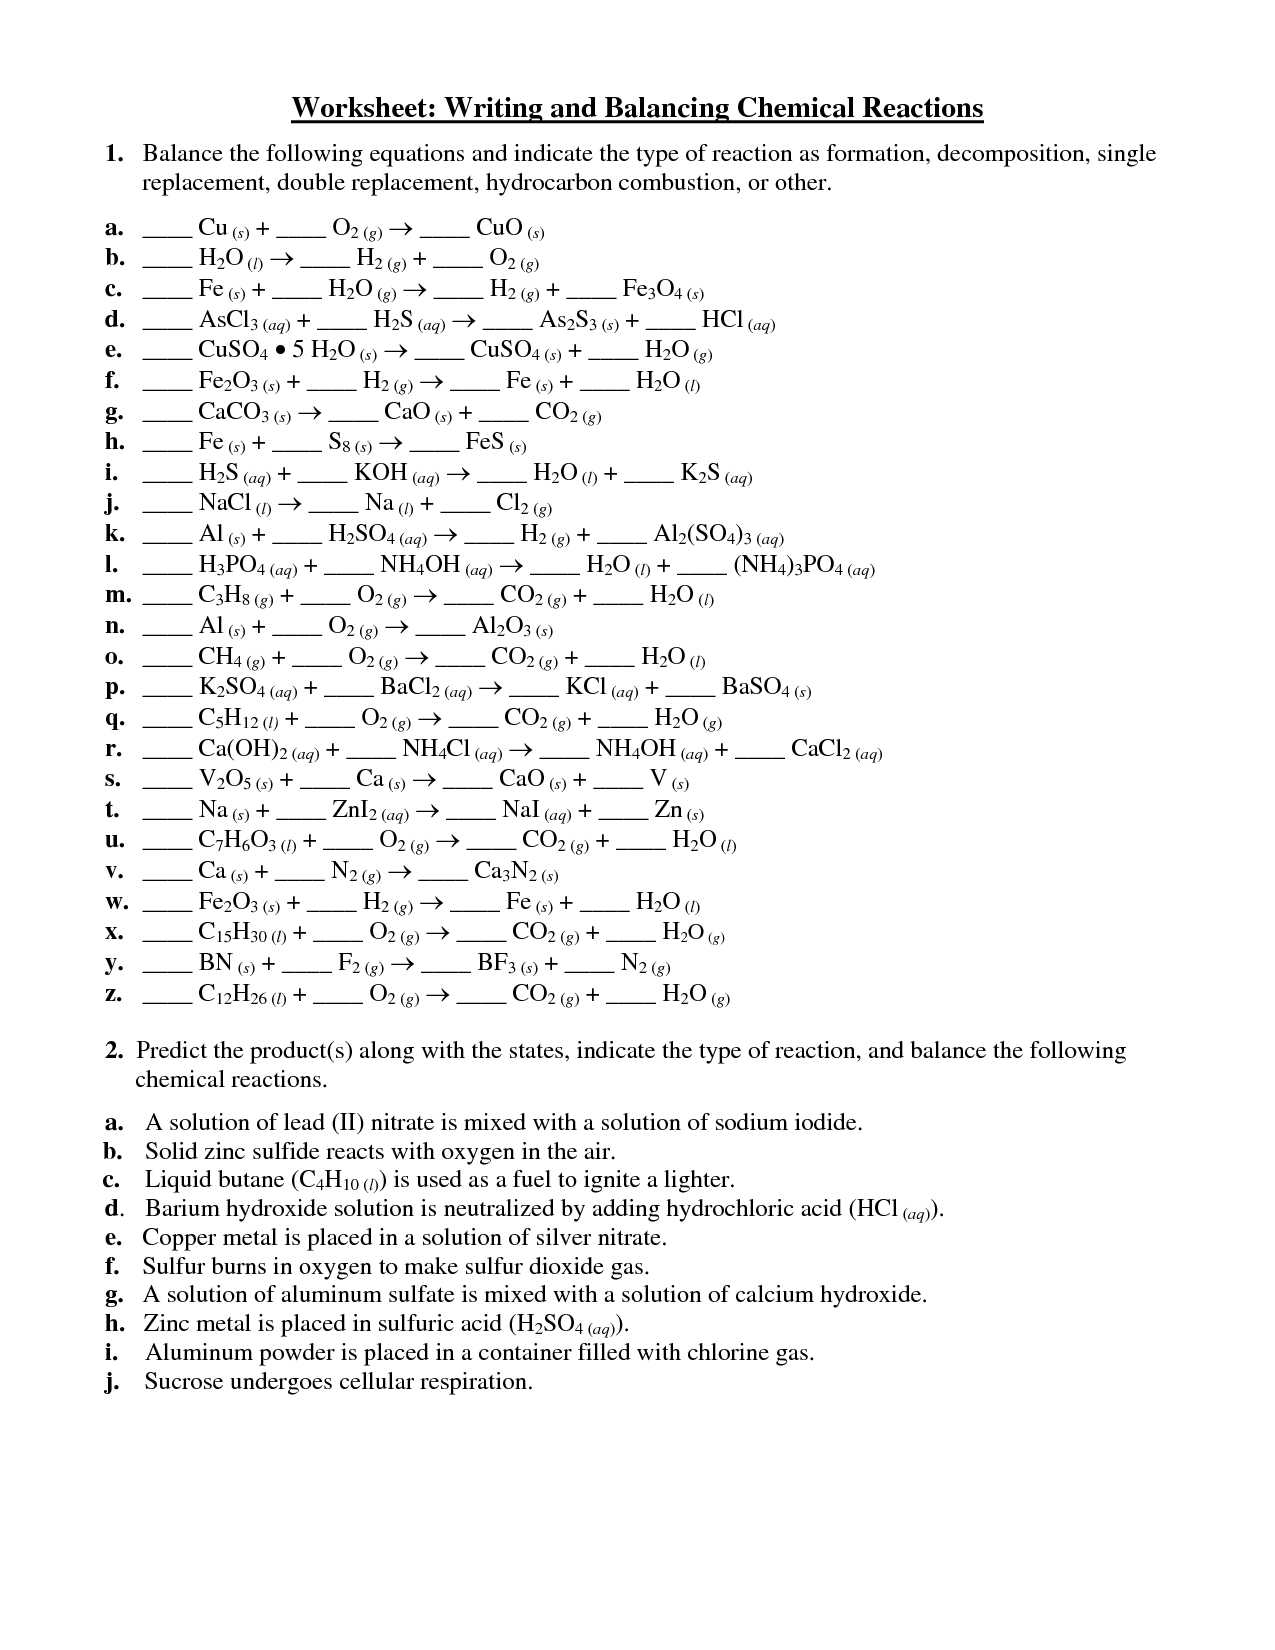 Balancing Chemical Equations Practice Worksheet with Answers together with Types Chemical Reactions Classifying Chemical Reactions